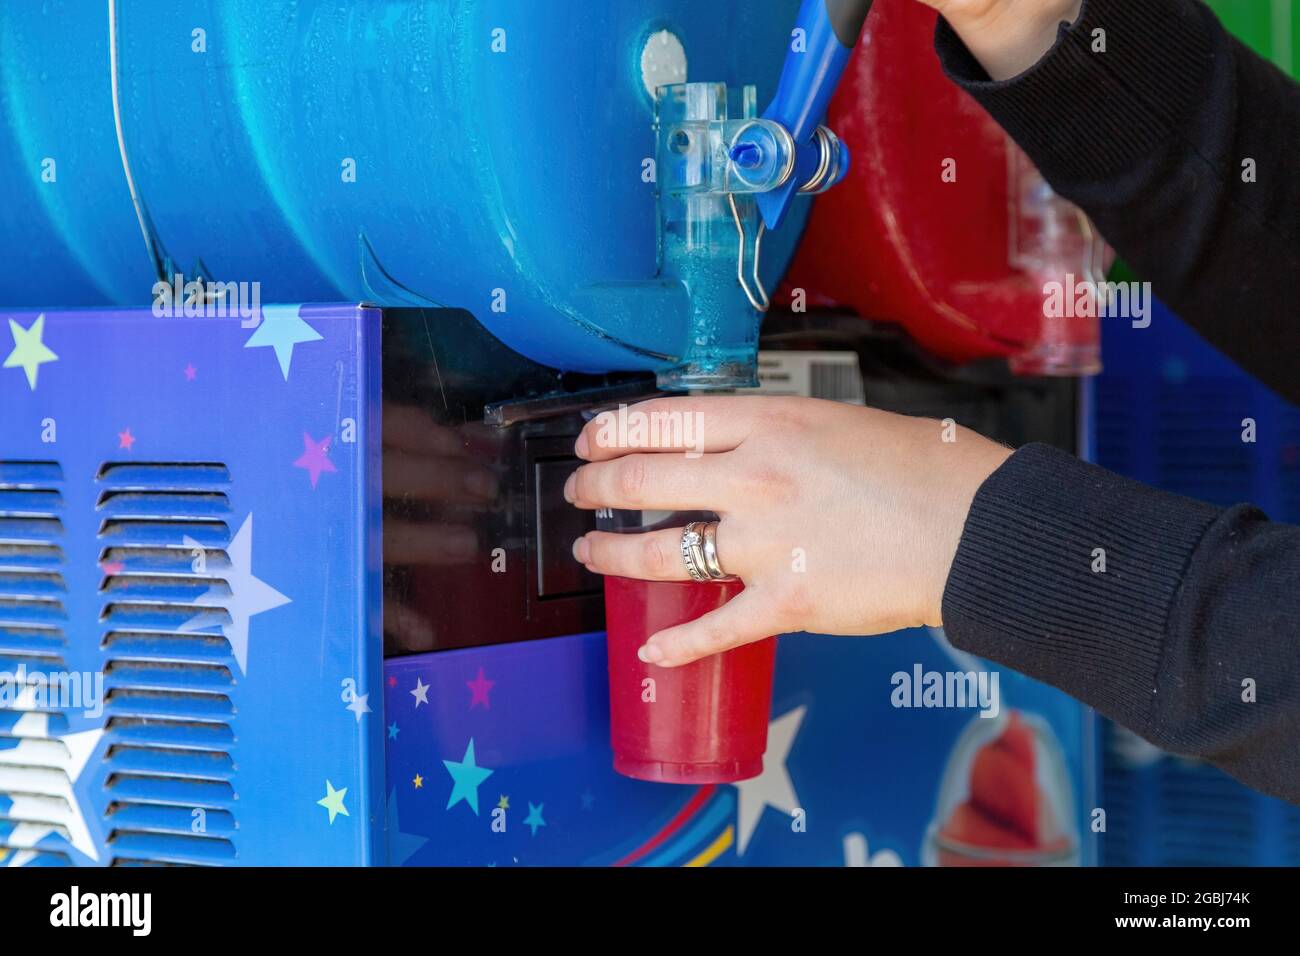 a slushie drink or slush puppy iced drink being poured from a machine into a plastic cup Stock Photo